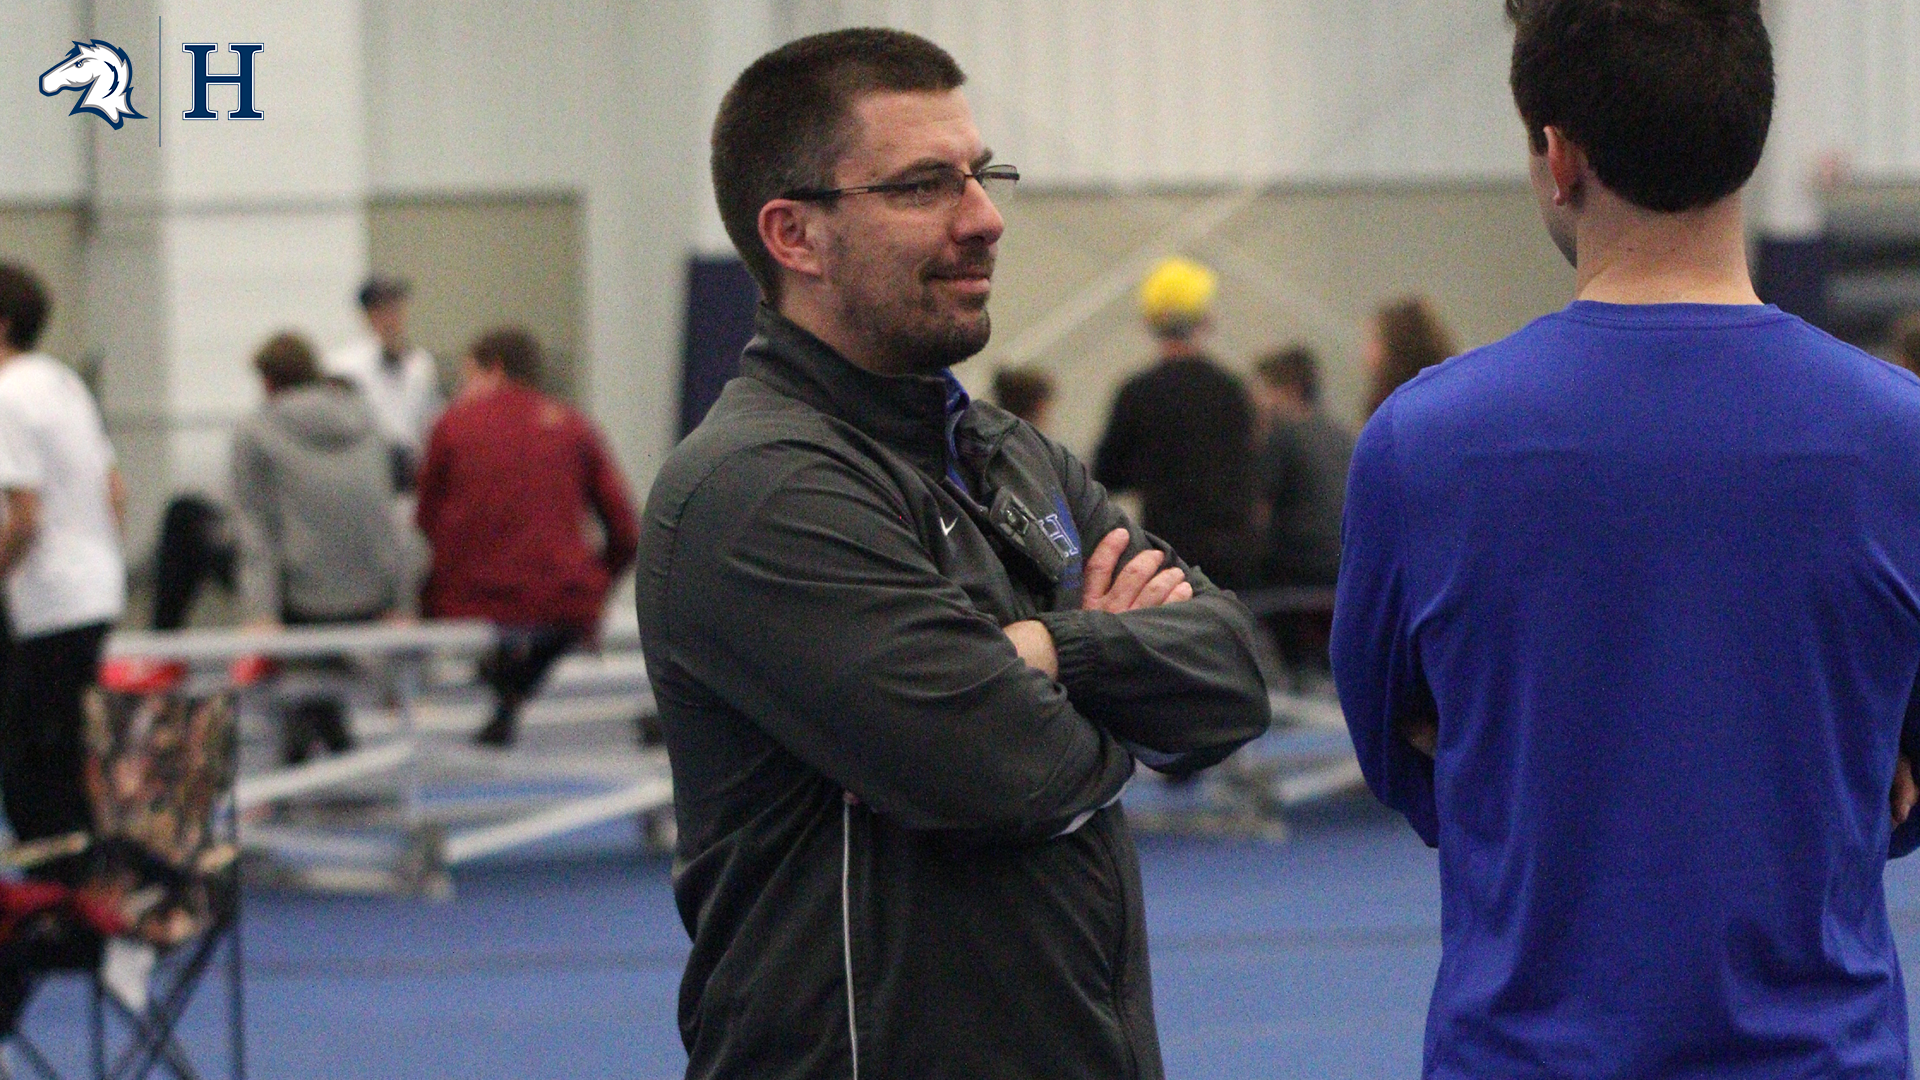 Charger track and field head coach Andrew Towne stepping down after successful run